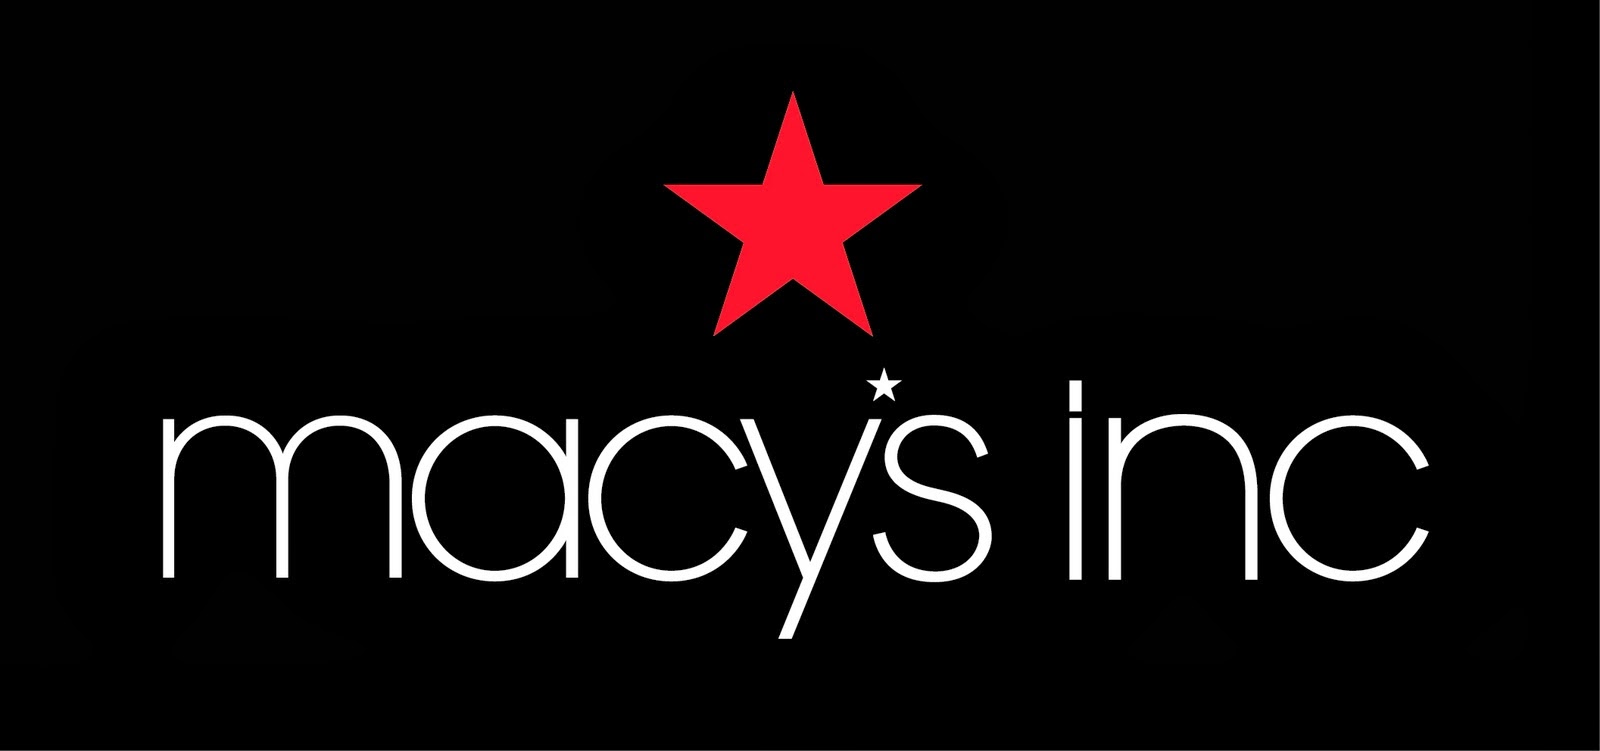 Macys Coupon in Store: Extra 25% OFF Men’s Clearance Shoes at Macys